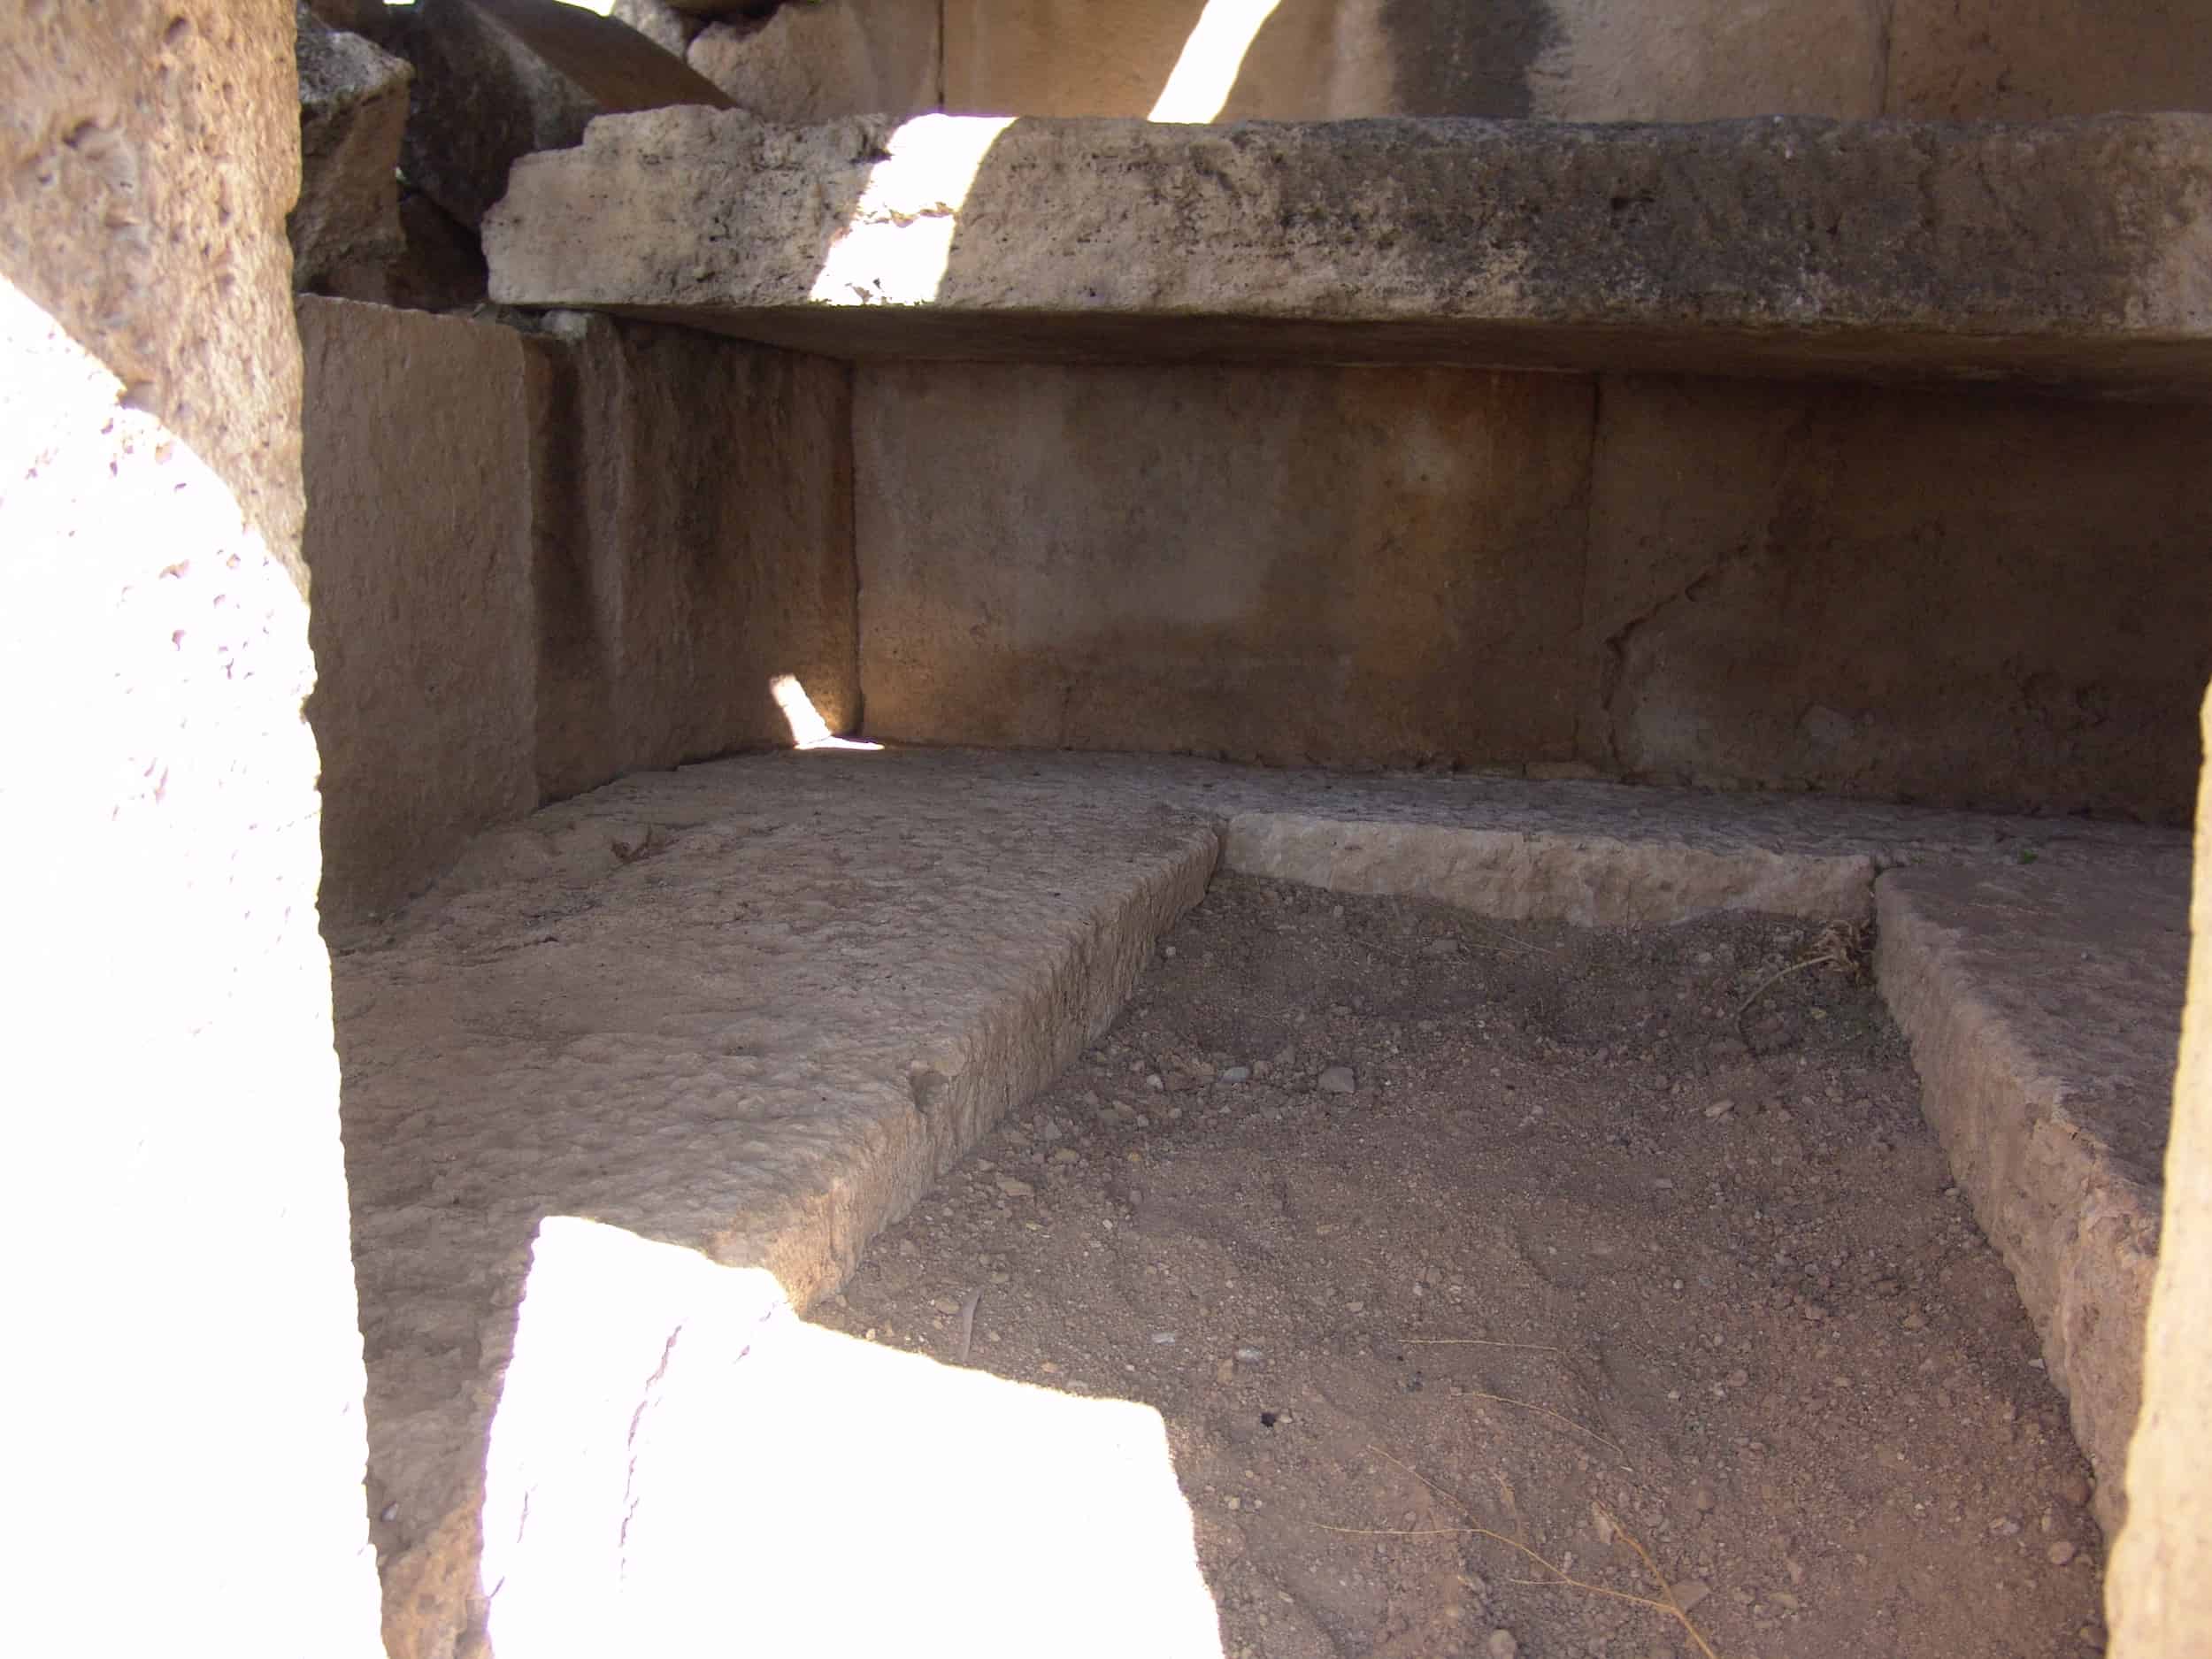 Interior of the tomb in the eastern necropolis